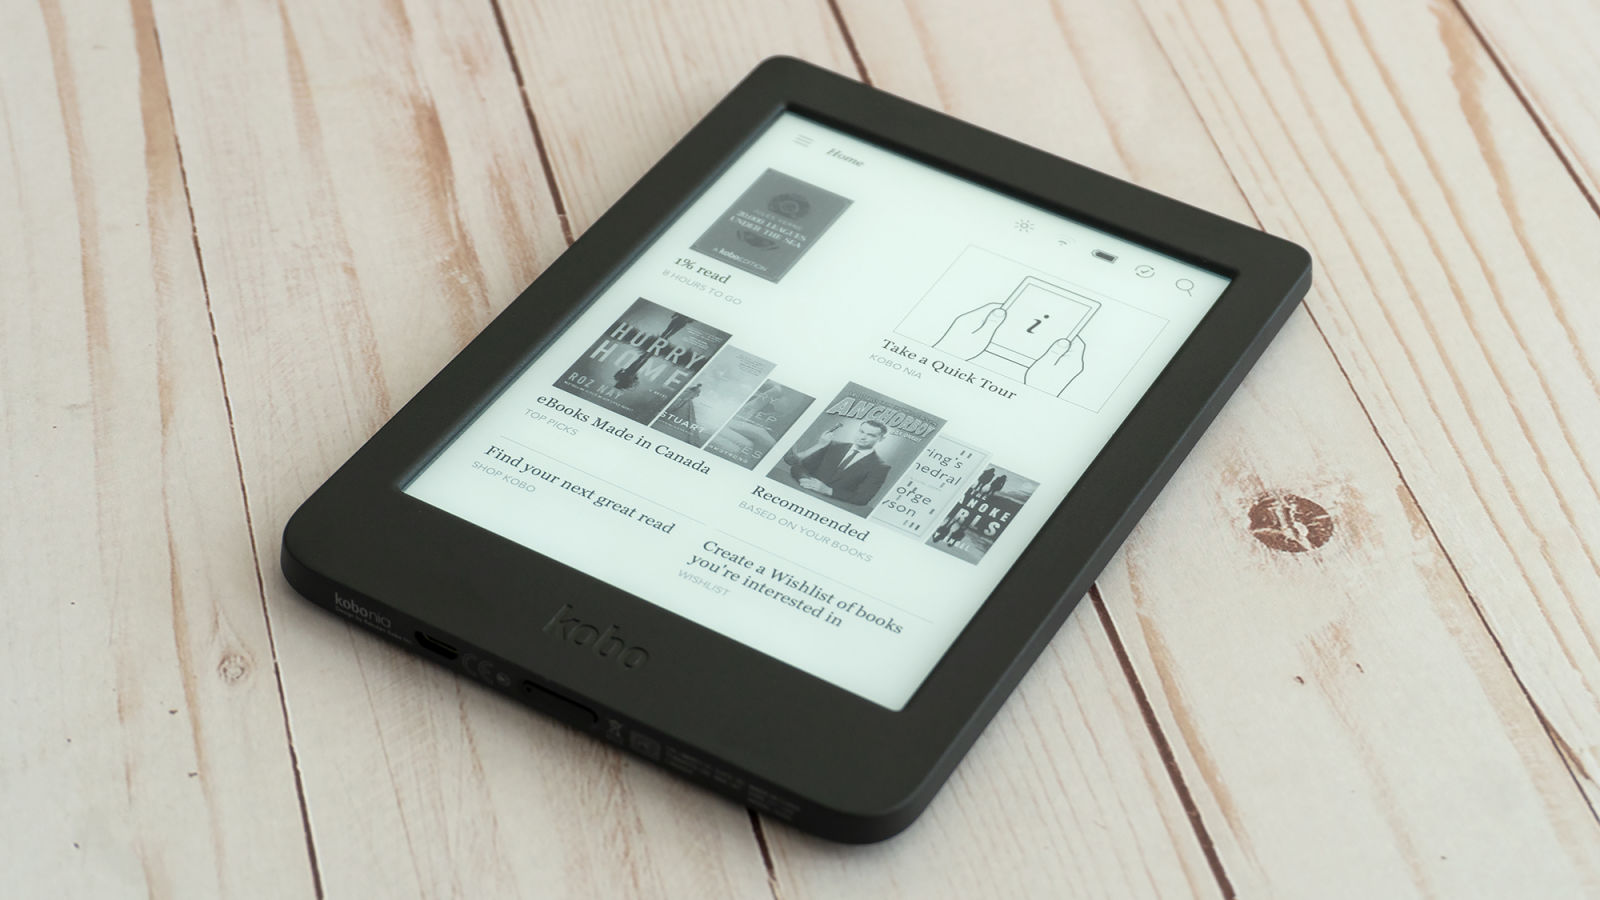 At $100 the Kobo Nia is a tough sell next to the $120 Kobo Clara HD, but as we get closer to the holidays, you can expect the Nia to be the first Kobo to be discounted.